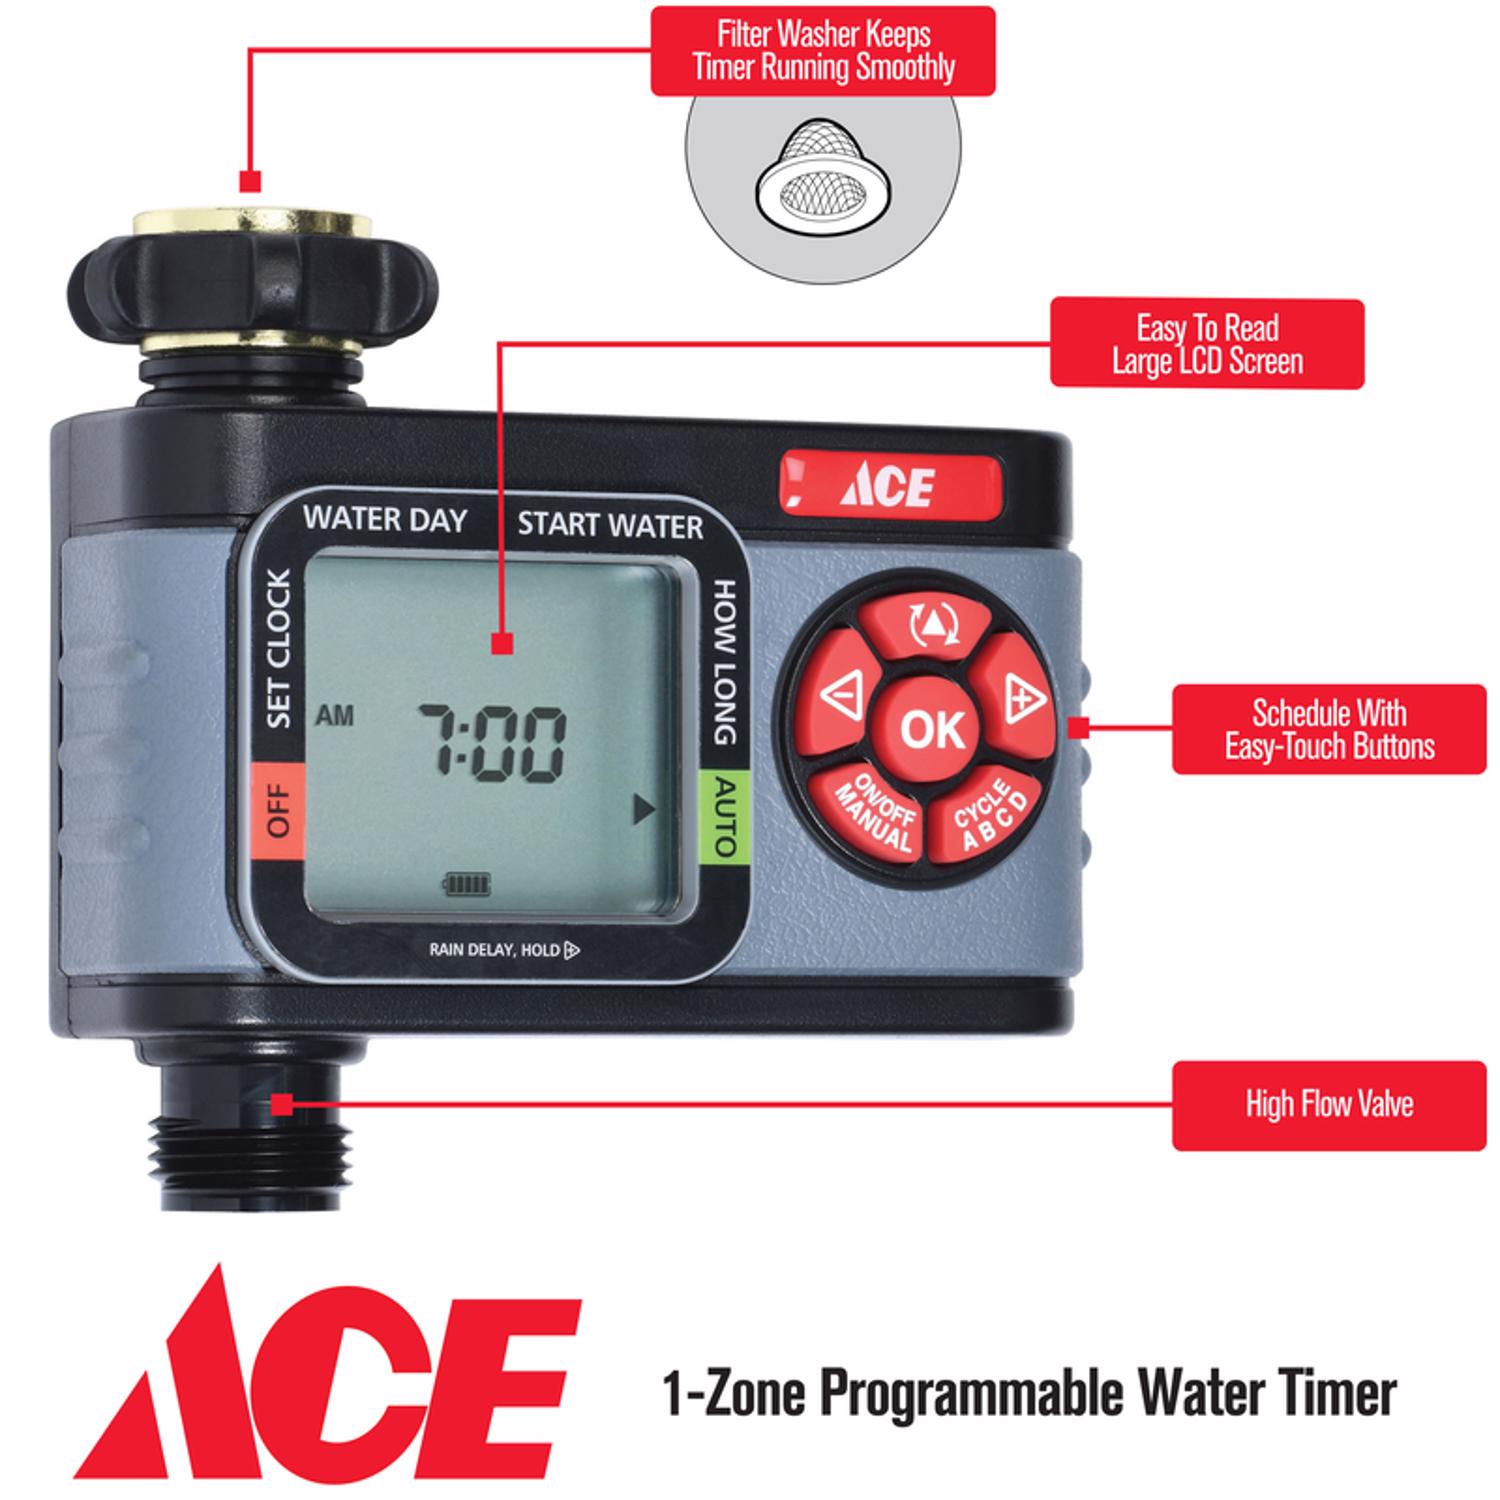 Kitchen Timers - Ace Hardware